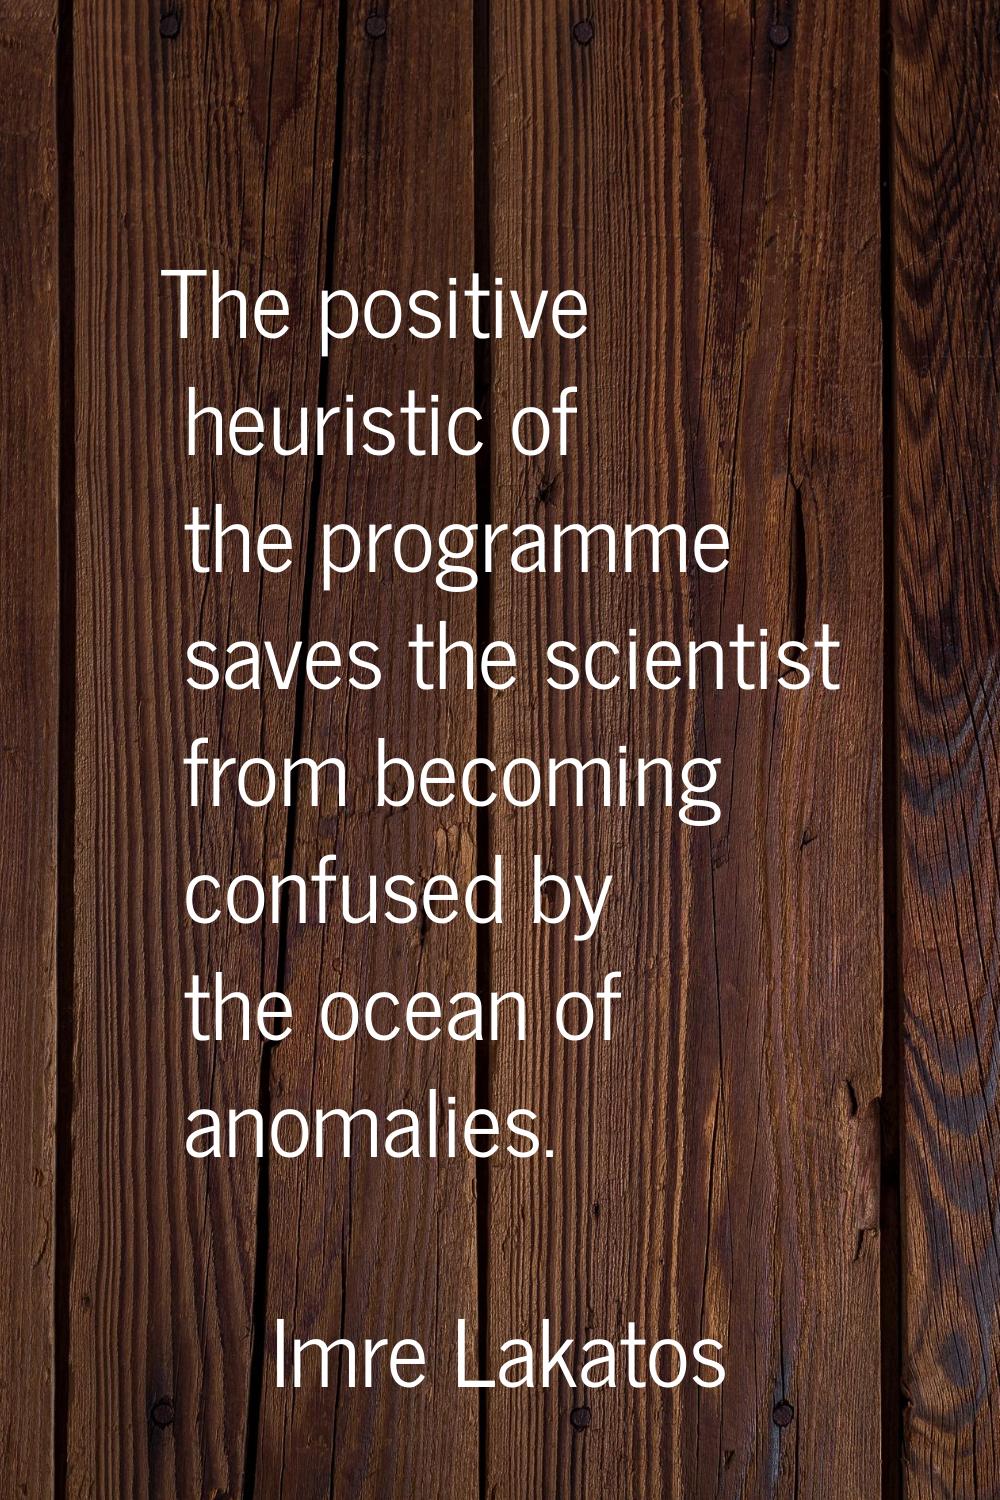 The positive heuristic of the programme saves the scientist from becoming confused by the ocean of 